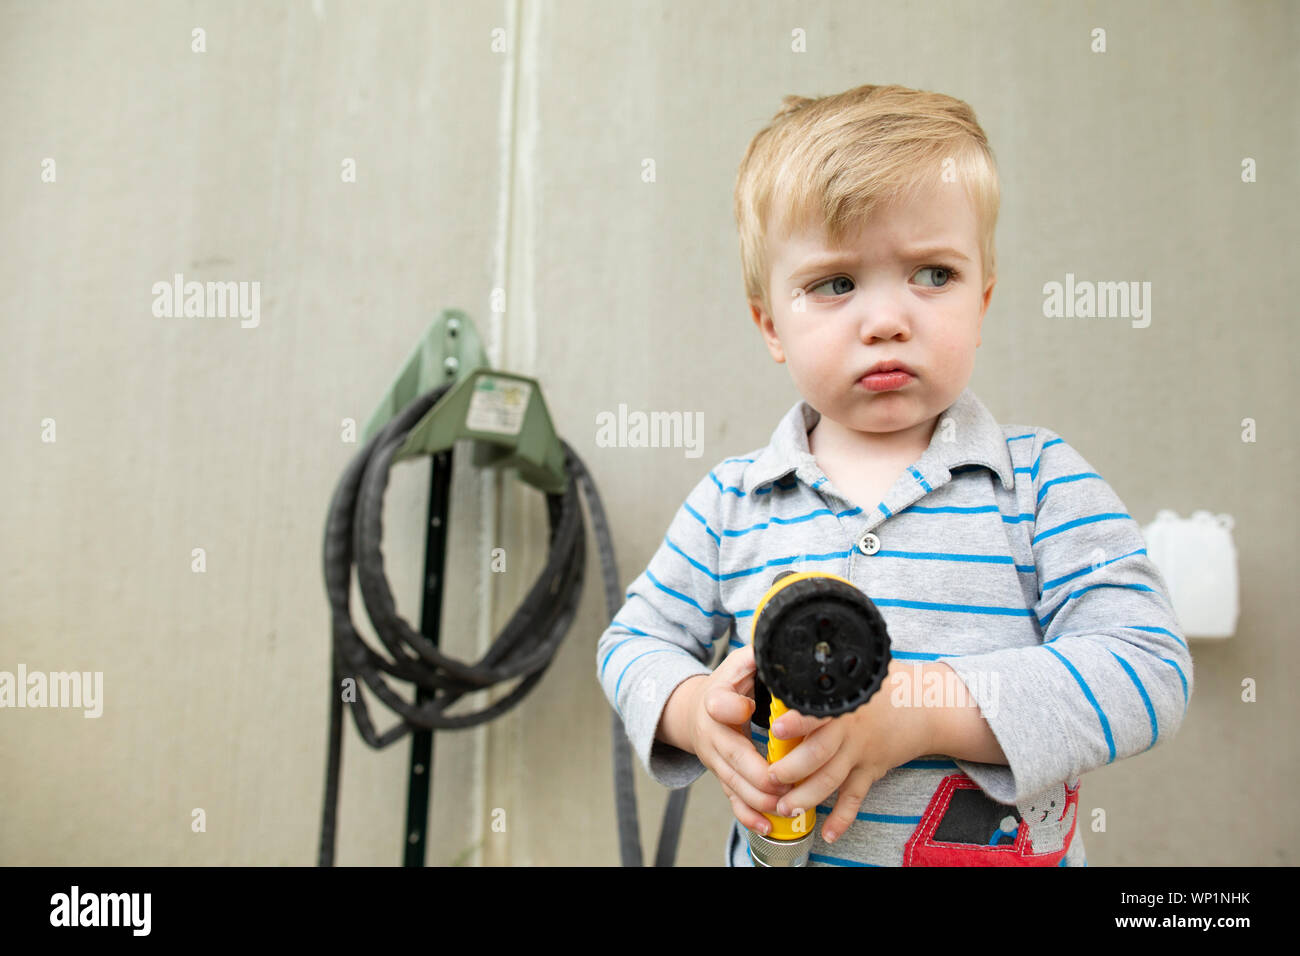 Upset toddler boy looks sideways while pouting and holding garden hose Stock Photo